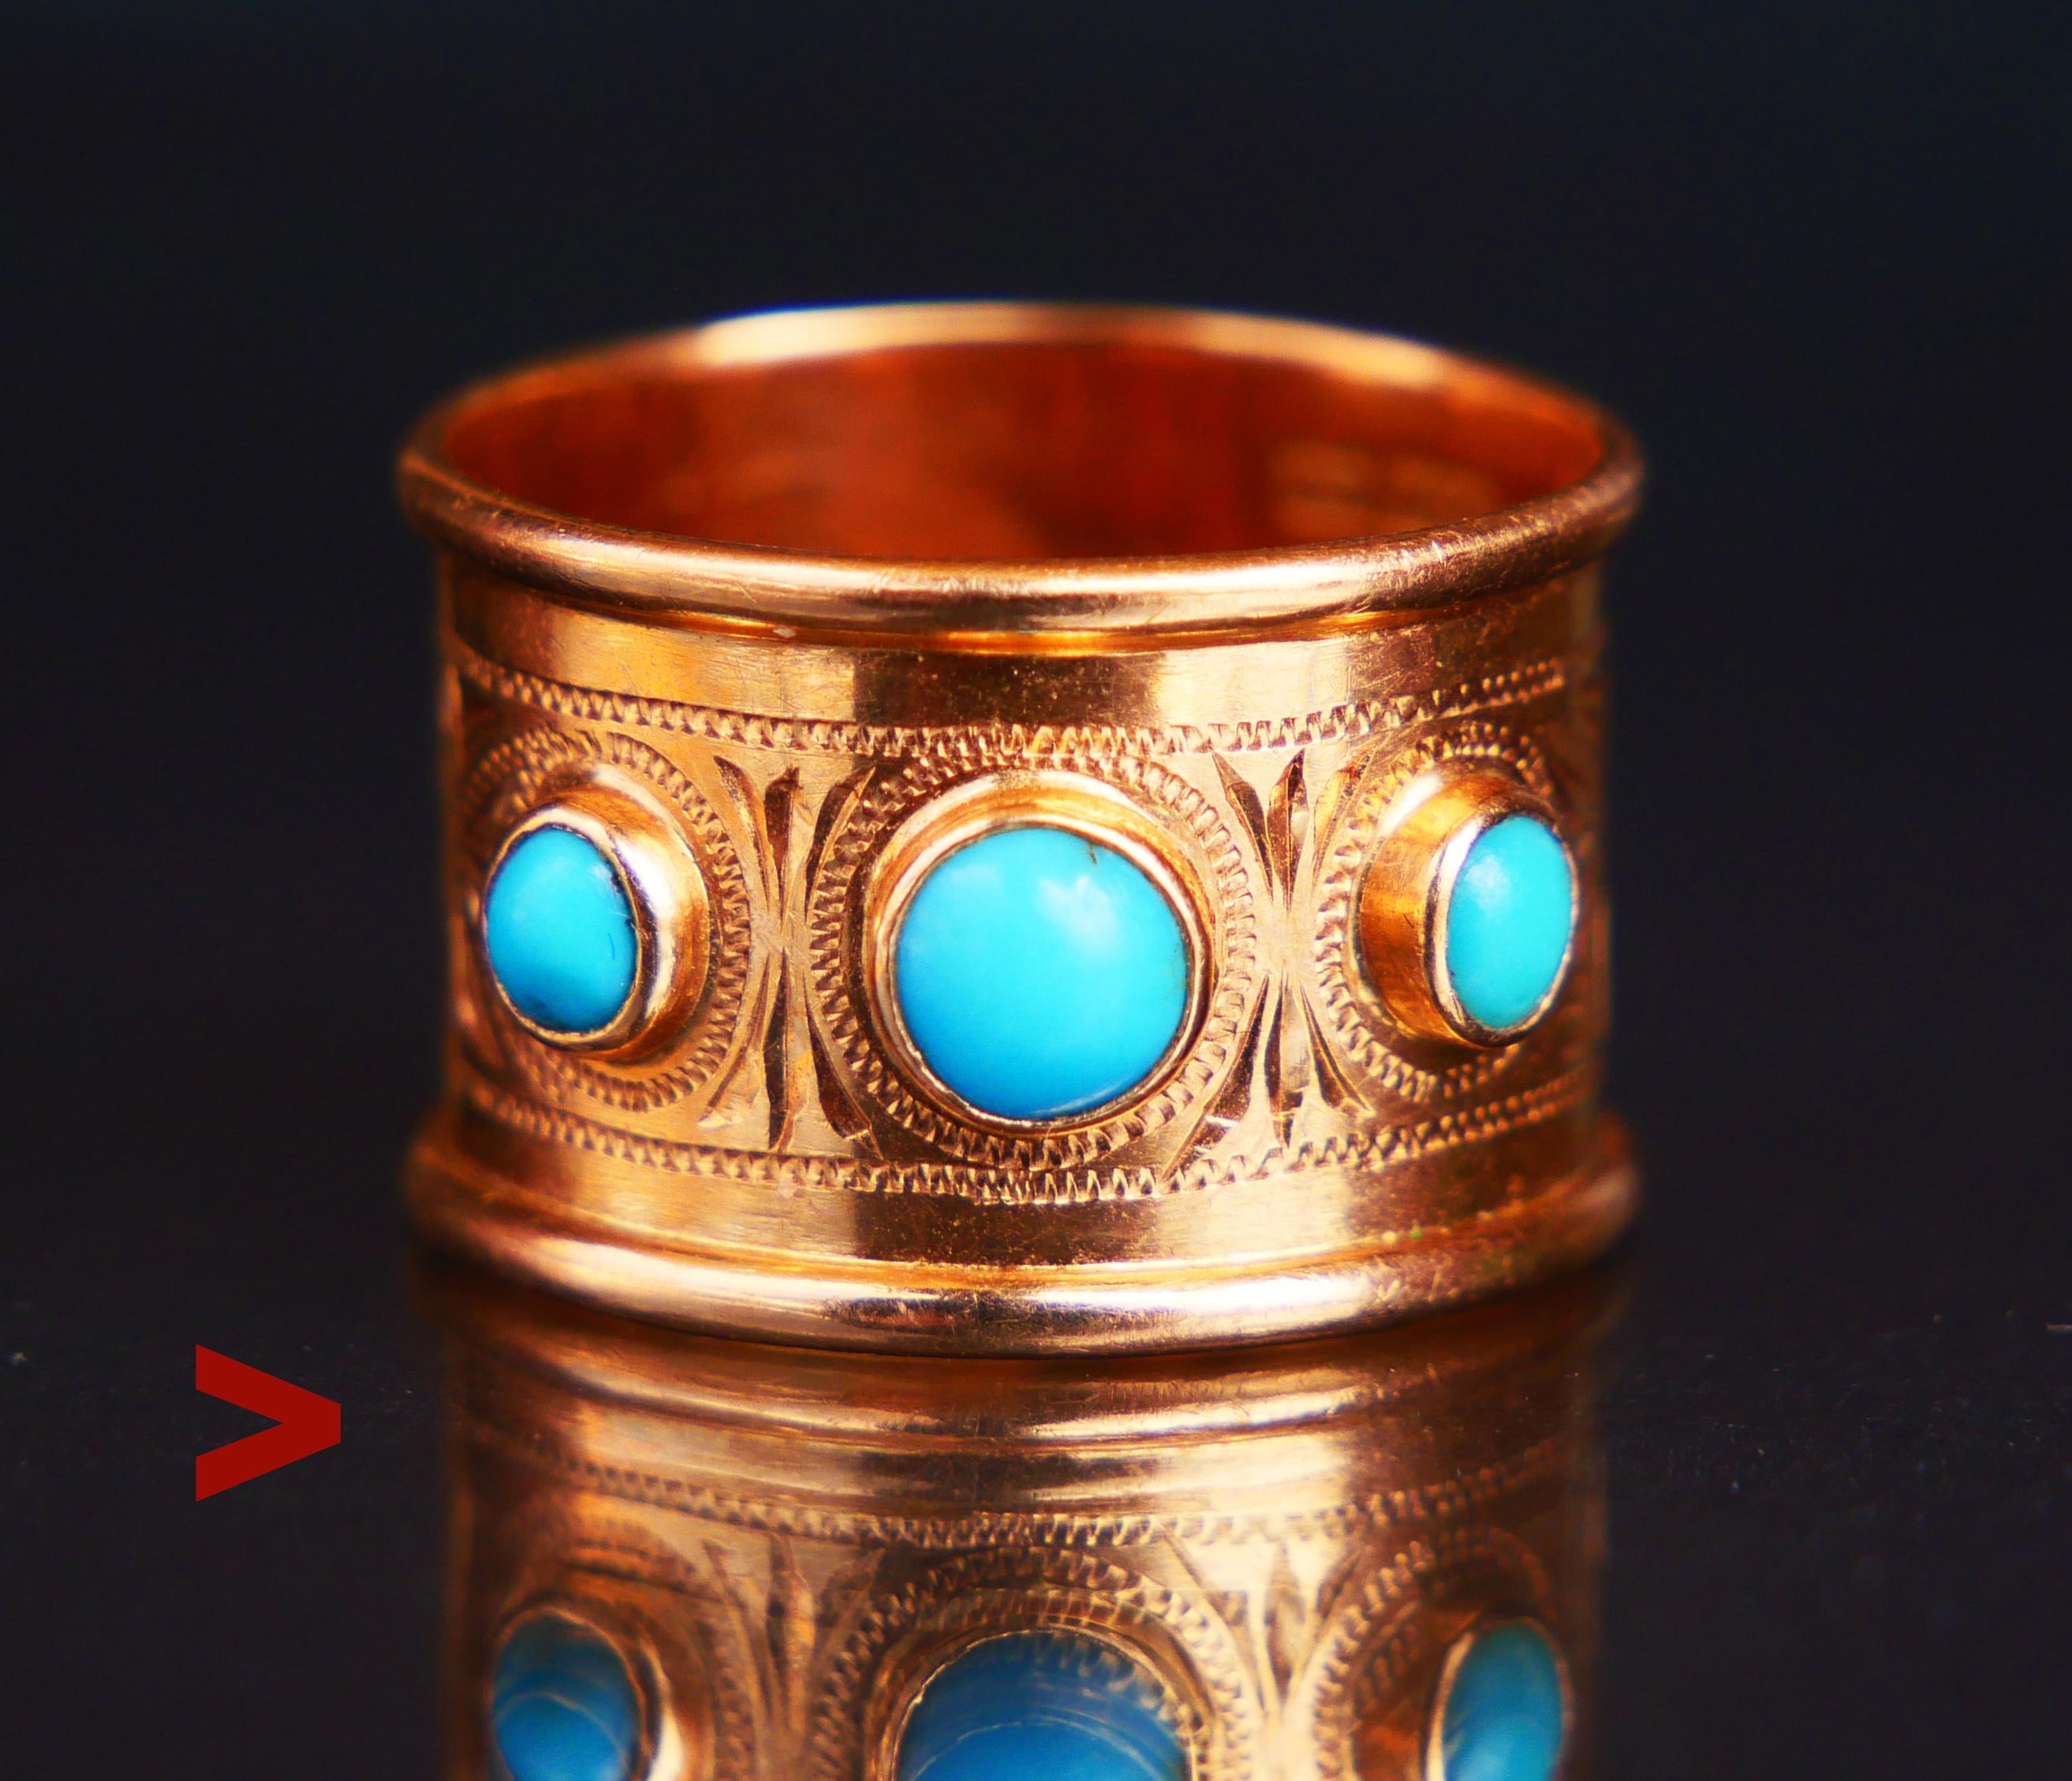 Wide band Neoclassical / Renaissance styled hand-made Ring in Yellow 18K Gold featuring three bezel set natural vivid Blue Turquoise stones cut cabochon. Central stone Ø 3.75 mm / ca.0.25 ct. Two on the flanks about Ø 2.75 mm / ca.0.12 ct each.